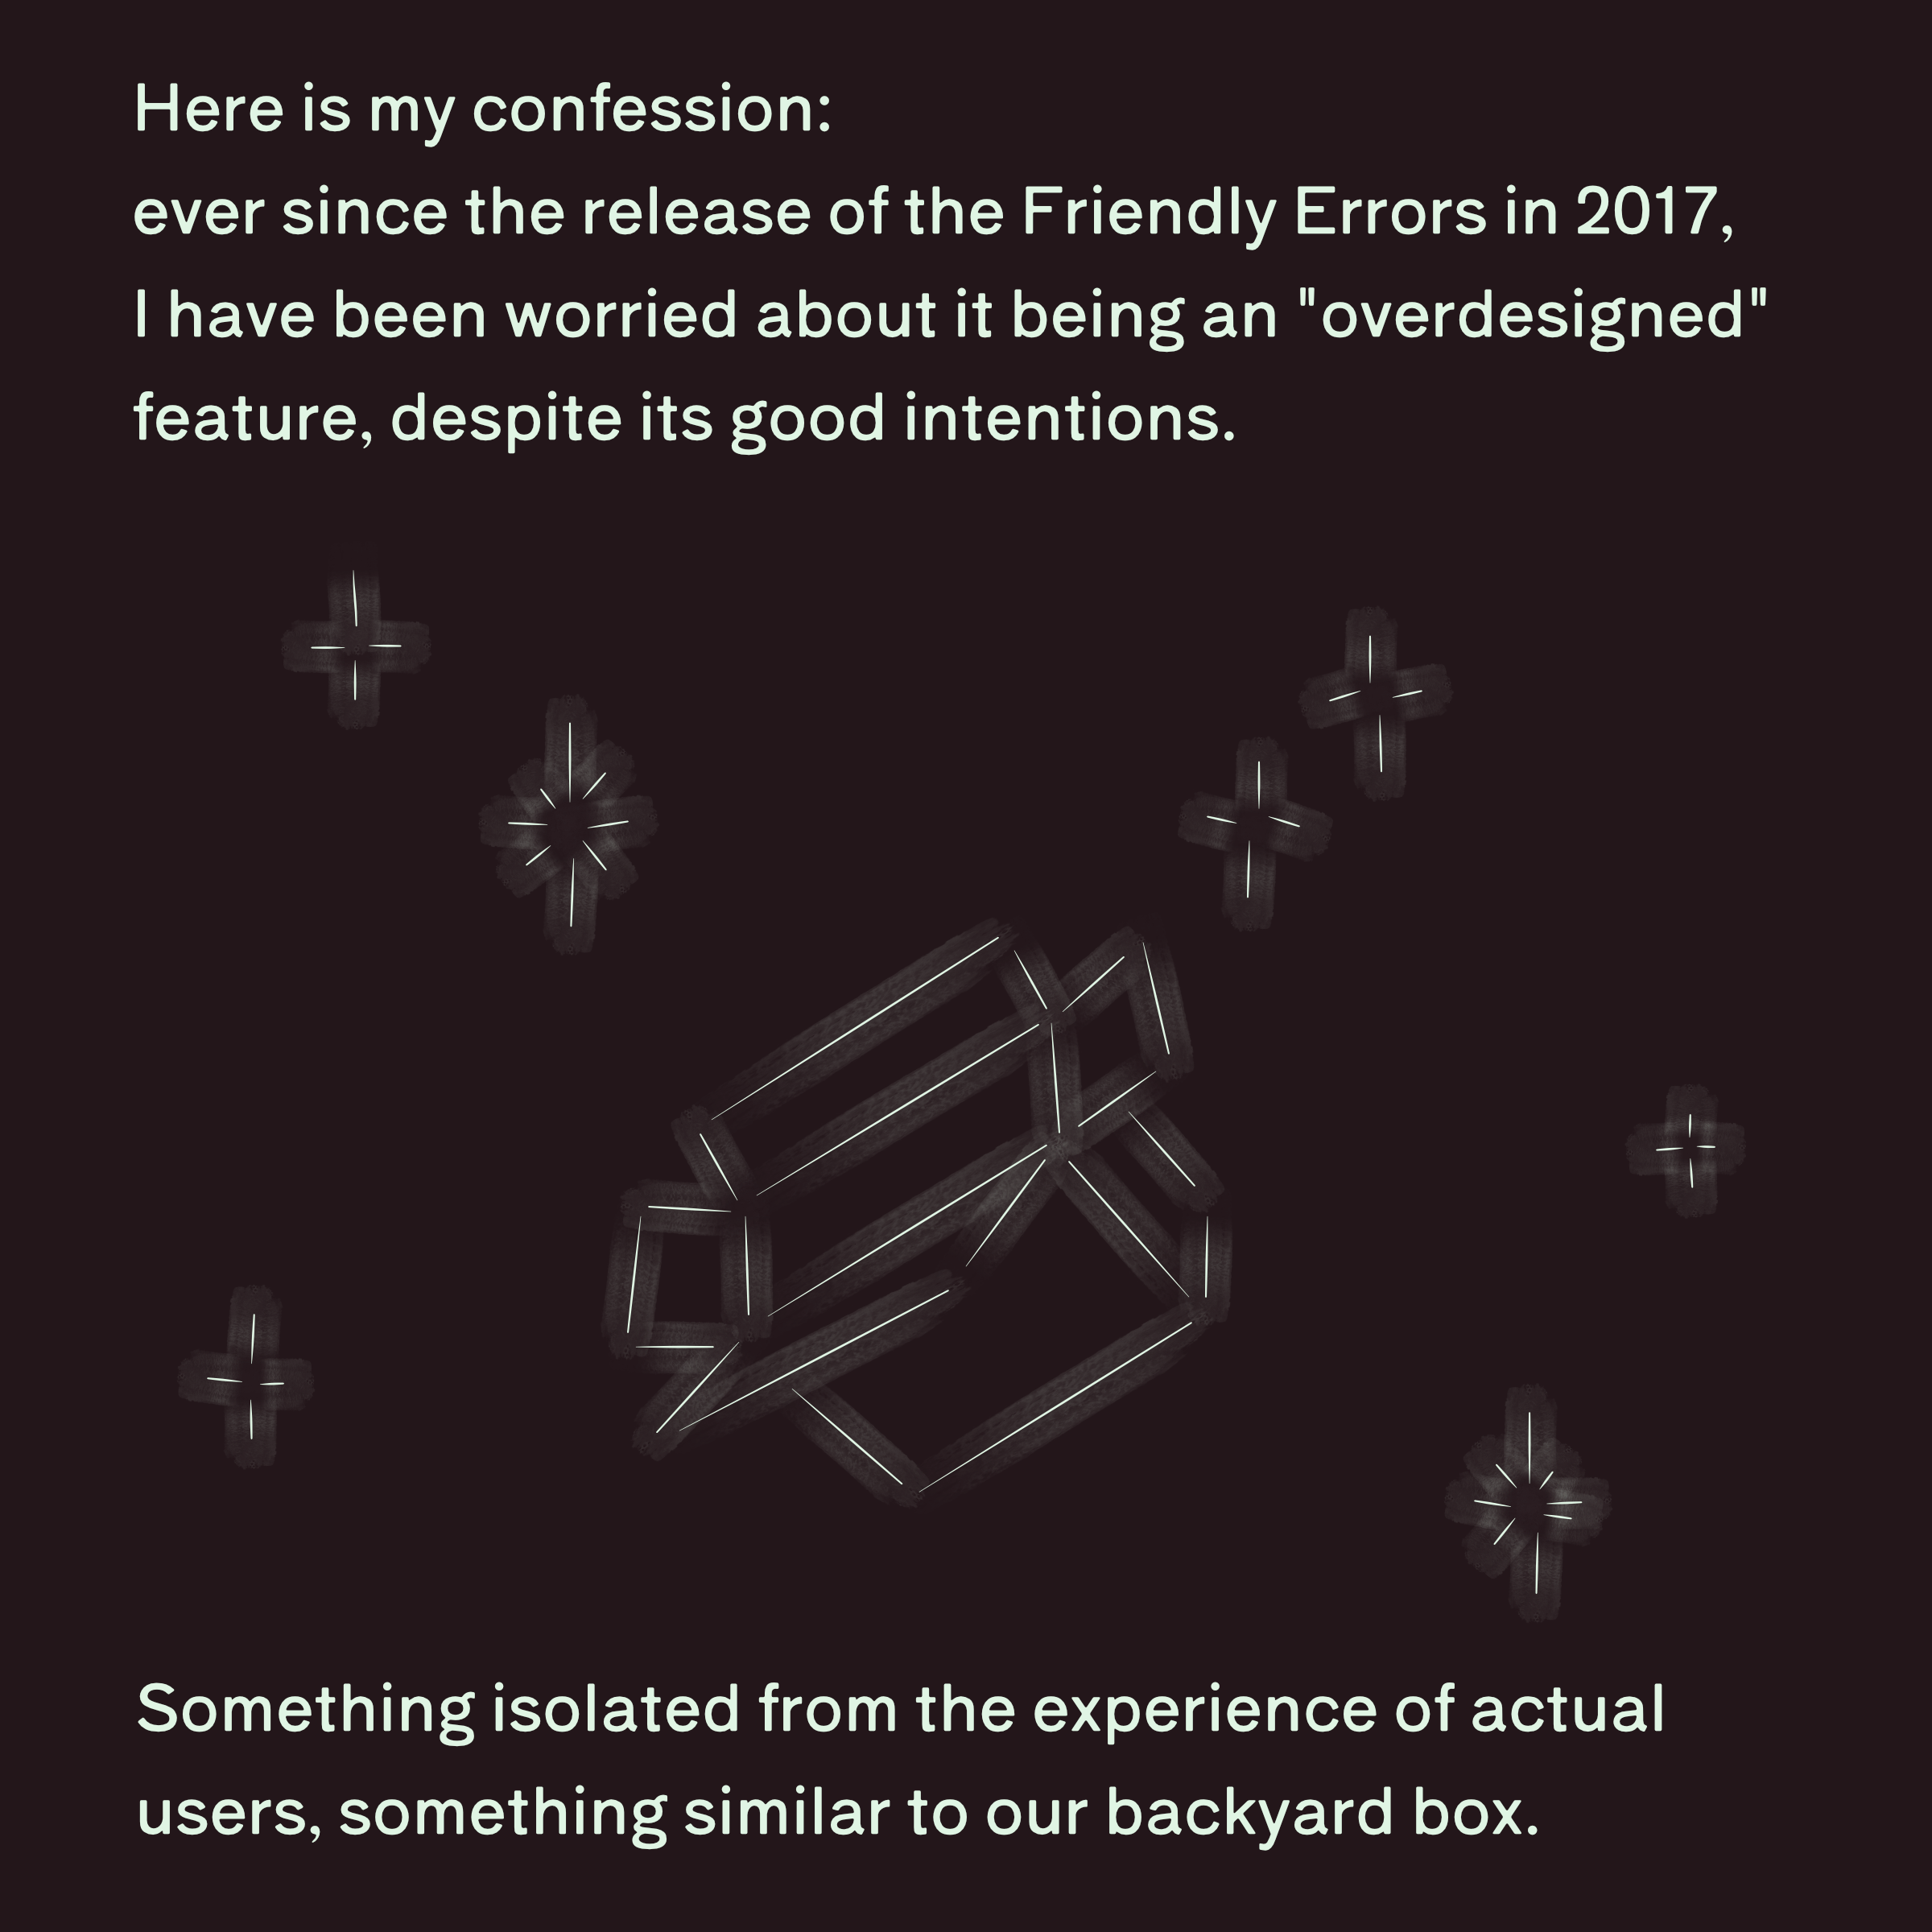 Here is my confession: ever since the release of the friendly errors in 2017, I have been worried about it being an "overdesigned" feature, despite its good intentions. Something isolated from the experience of actual users, something similar to our backyard box.